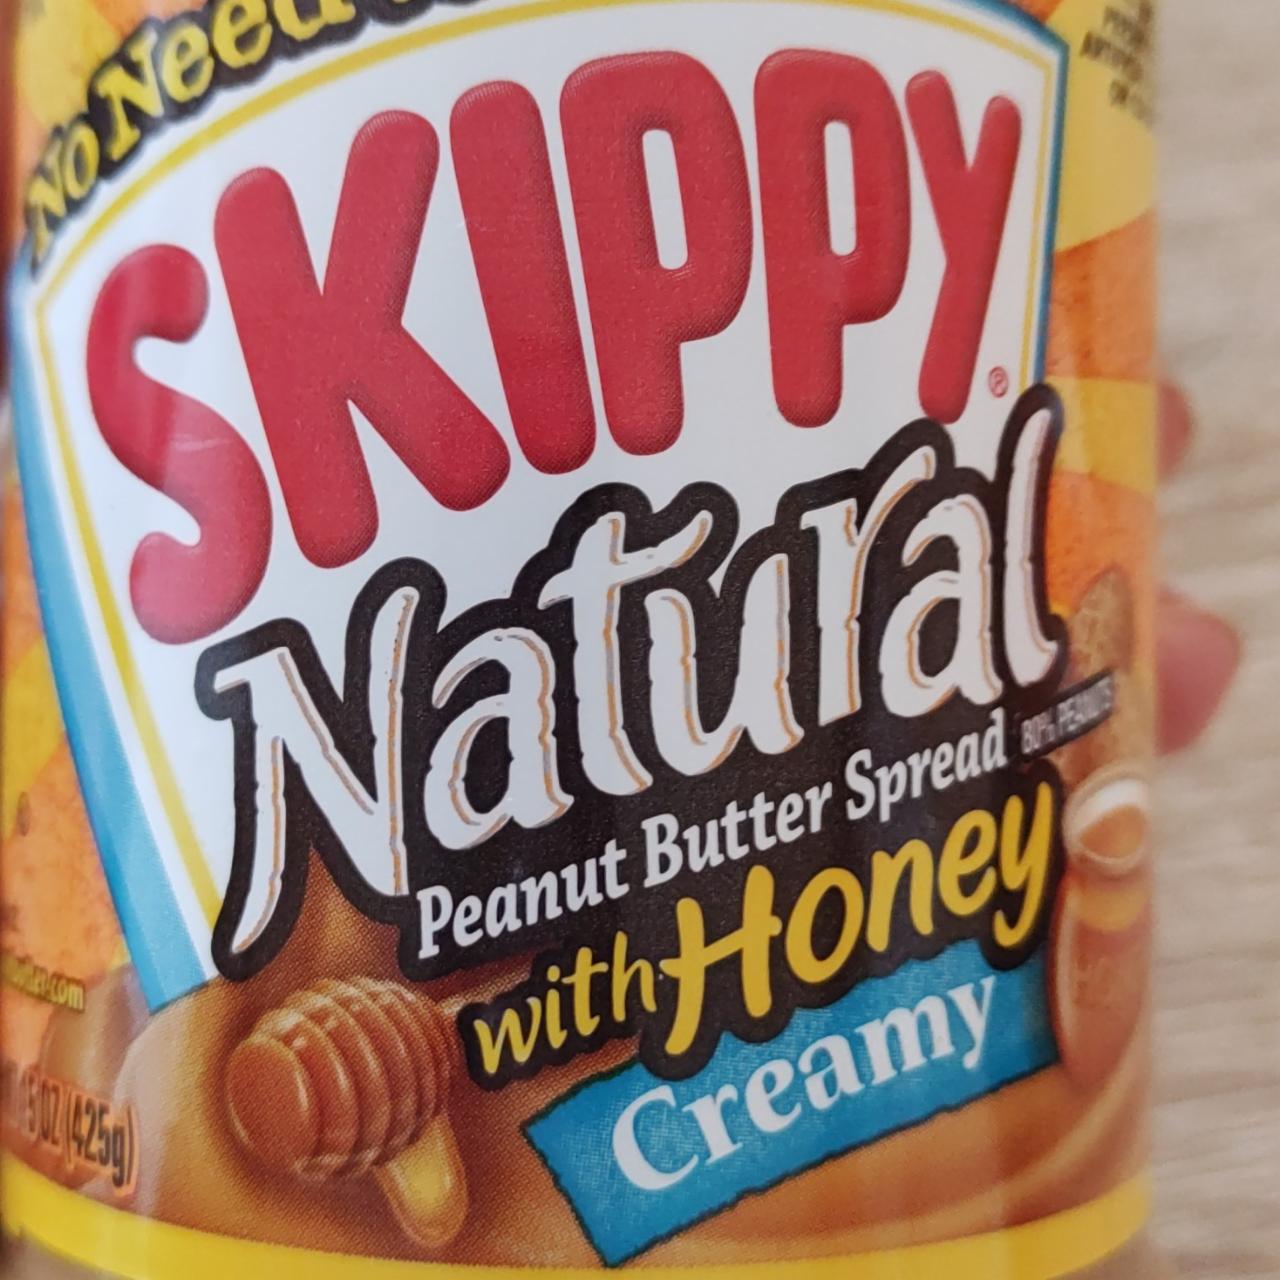 Fotografie - Natural Peanut Butter Spread with Honey Creamy Skippy